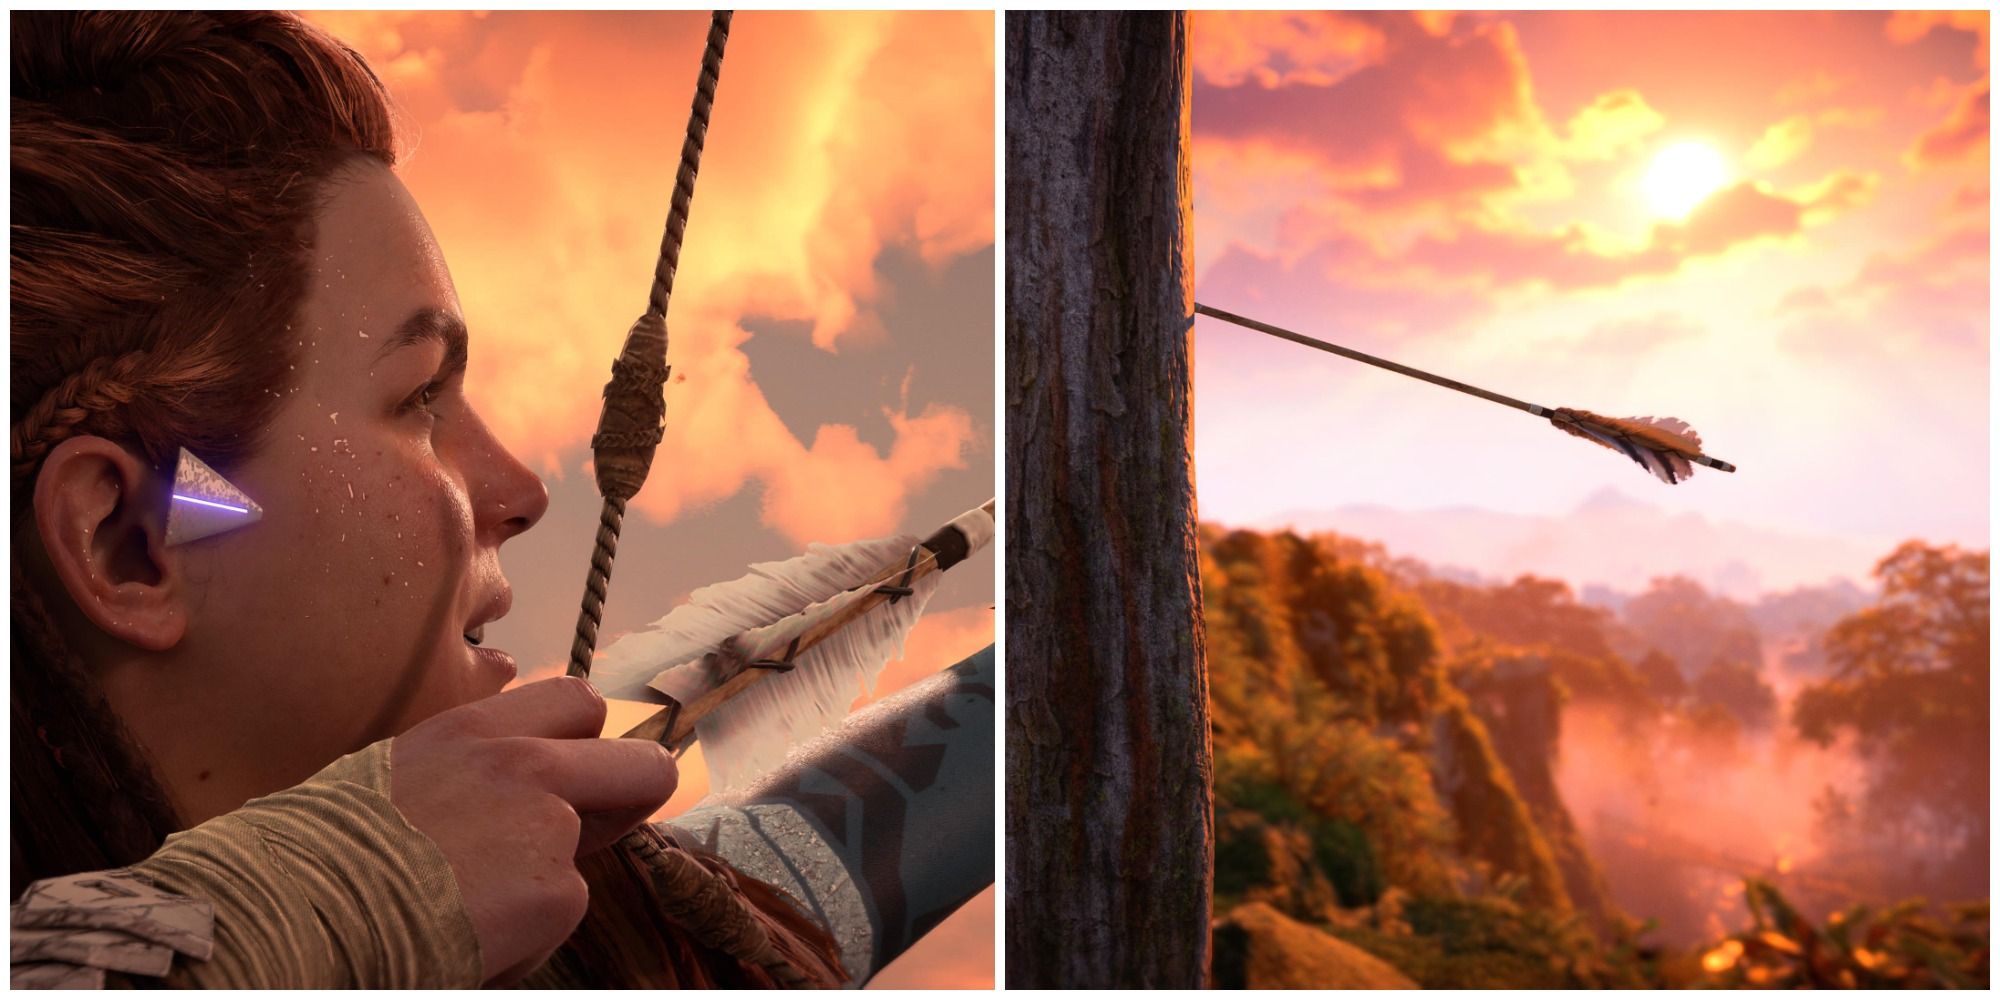 HFW Aloy Aiming Bow And Arrow In Tree Split Image